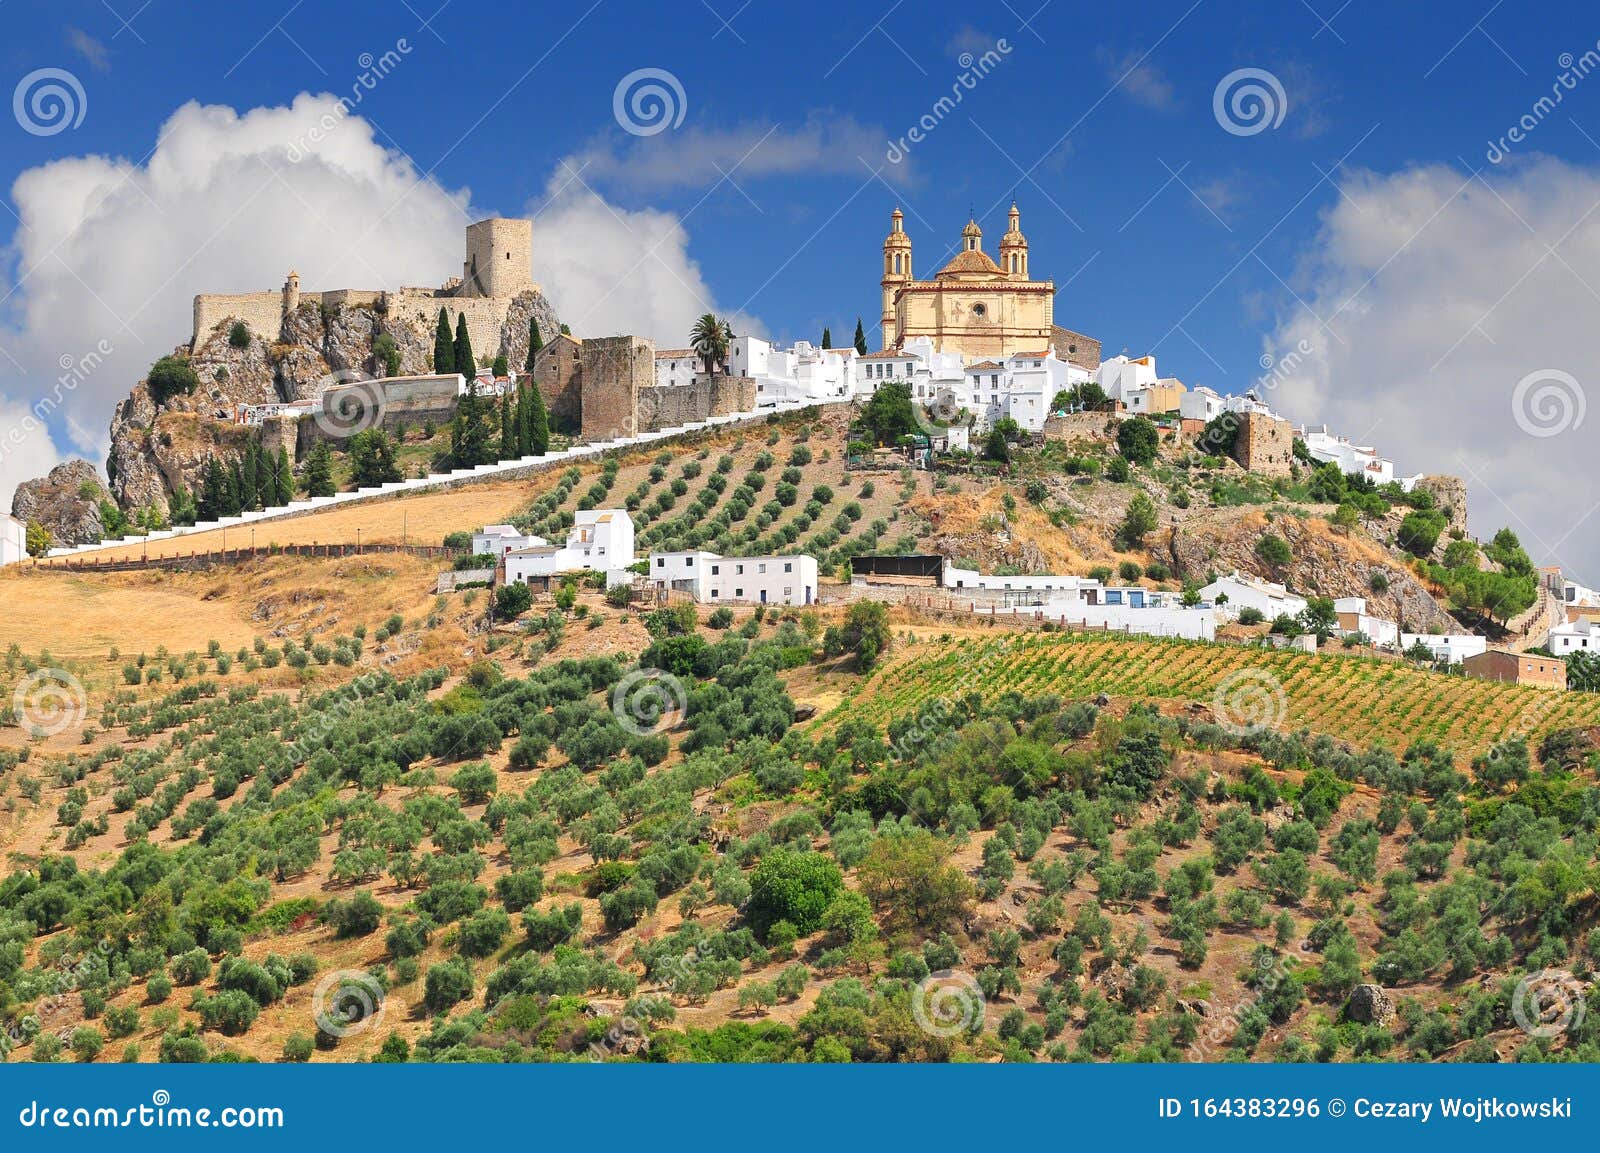 olvera is a white village pueblo blanco in cadiz province, andalucia, spain. it features a moorish fortress and a neoclassic